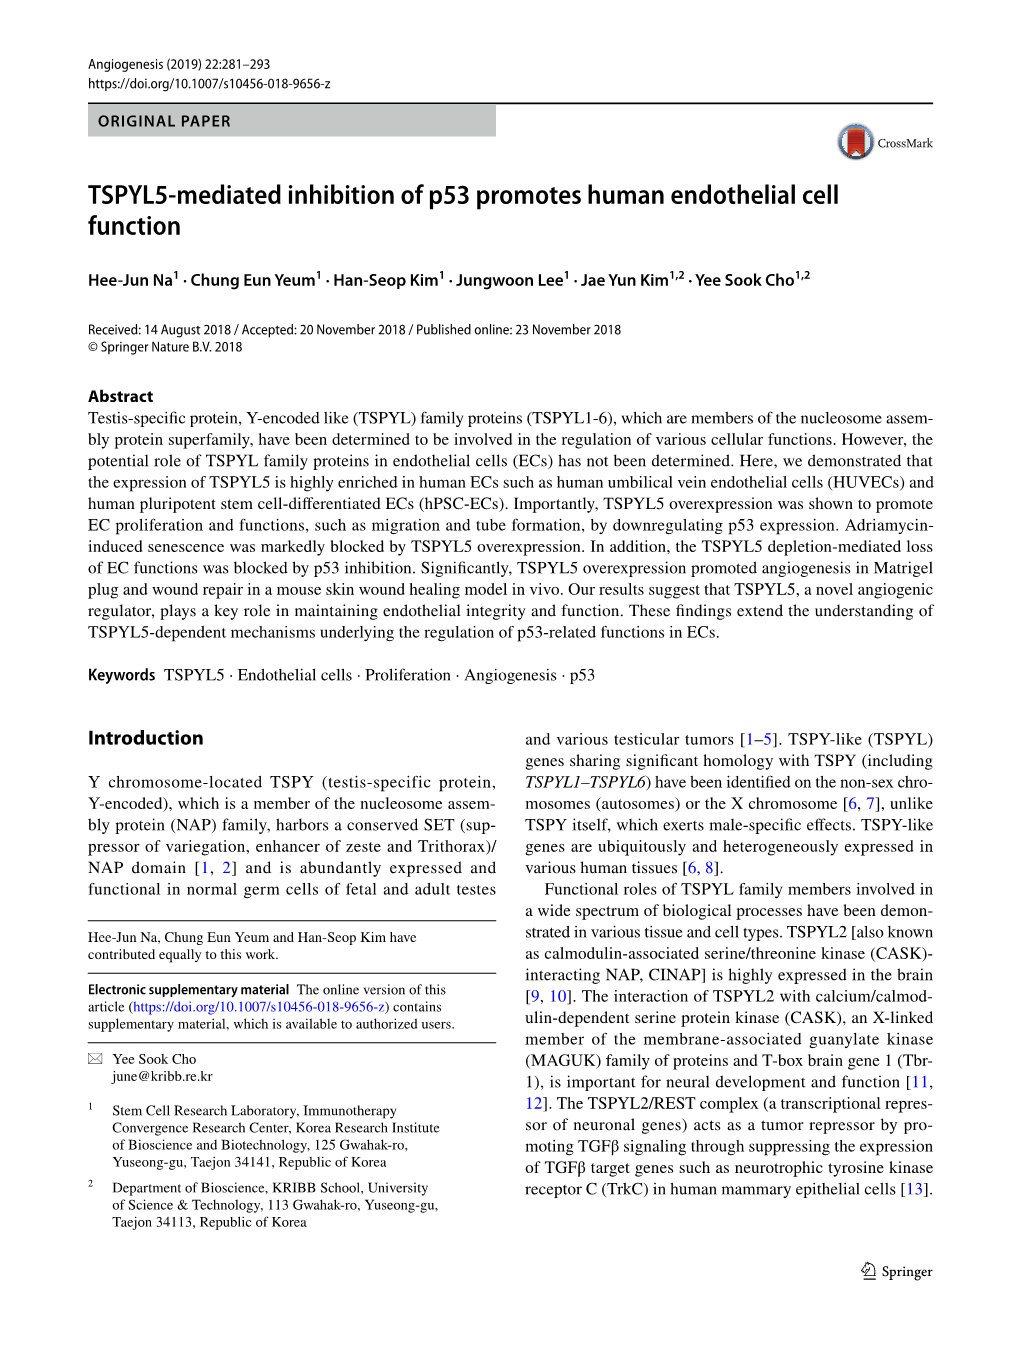 TSPYL5-Mediated Inhibition of P53 Promotes Human Endothelial Cell Function